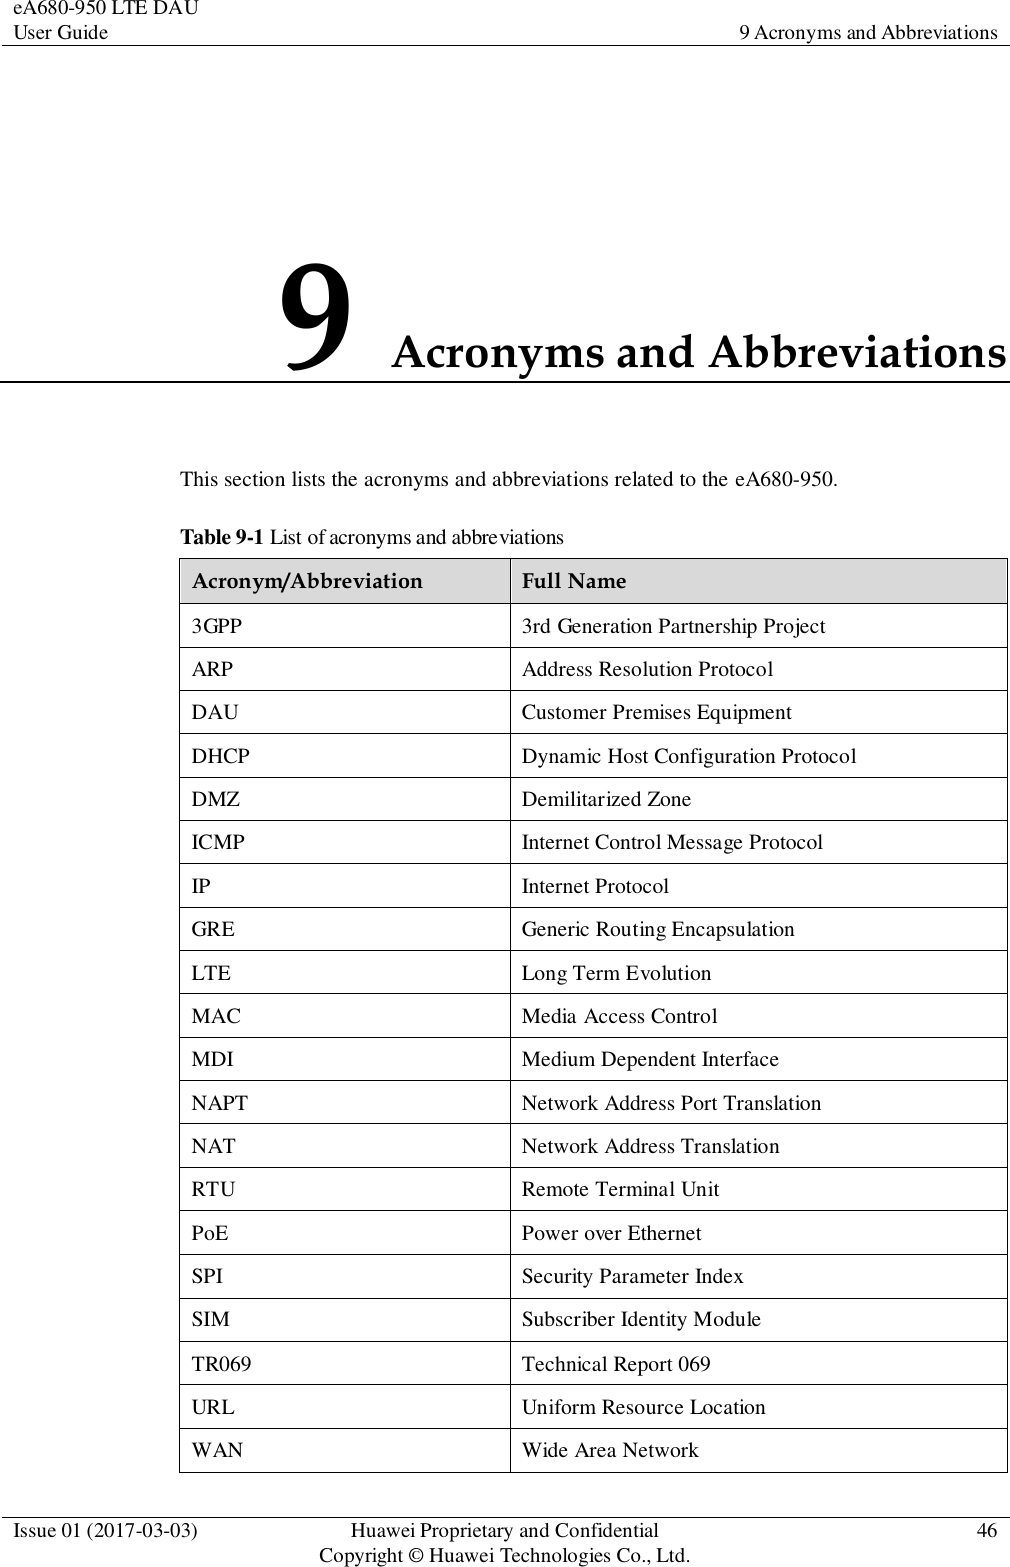 eA680-950 LTE DAU User Guide 9 Acronyms and Abbreviations  Issue 01 (2017-03-03) Huawei Proprietary and Confidential                                     Copyright © Huawei Technologies Co., Ltd. 46  9 Acronyms and Abbreviations This section lists the acronyms and abbreviations related to the eA680-950. Table 9-1 List of acronyms and abbreviations Acronym/Abbreviation Full Name 3GPP 3rd Generation Partnership Project ARP Address Resolution Protocol DAU Customer Premises Equipment DHCP Dynamic Host Configuration Protocol DMZ Demilitarized Zone ICMP Internet Control Message Protocol IP Internet Protocol GRE Generic Routing Encapsulation LTE Long Term Evolution MAC Media Access Control MDI Medium Dependent Interface NAPT Network Address Port Translation NAT Network Address Translation RTU Remote Terminal Unit PoE Power over Ethernet SPI Security Parameter Index SIM Subscriber Identity Module TR069 Technical Report 069 URL Uniform Resource Location WAN Wide Area Network 